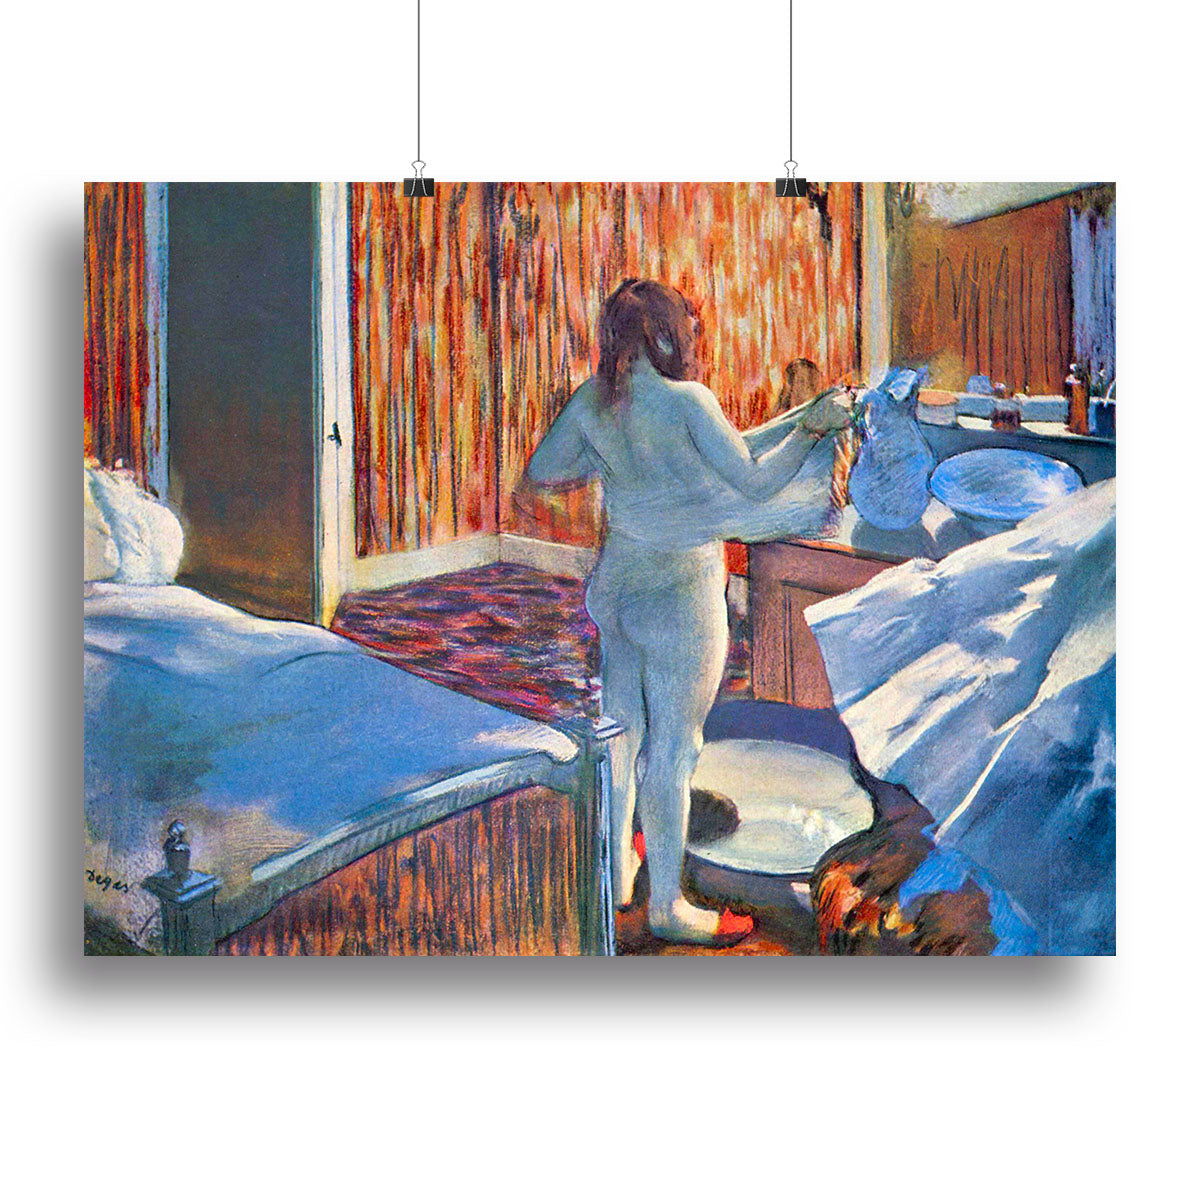 Women at the toilet 3 by Degas Canvas Print or Poster - Canvas Art Rocks - 2